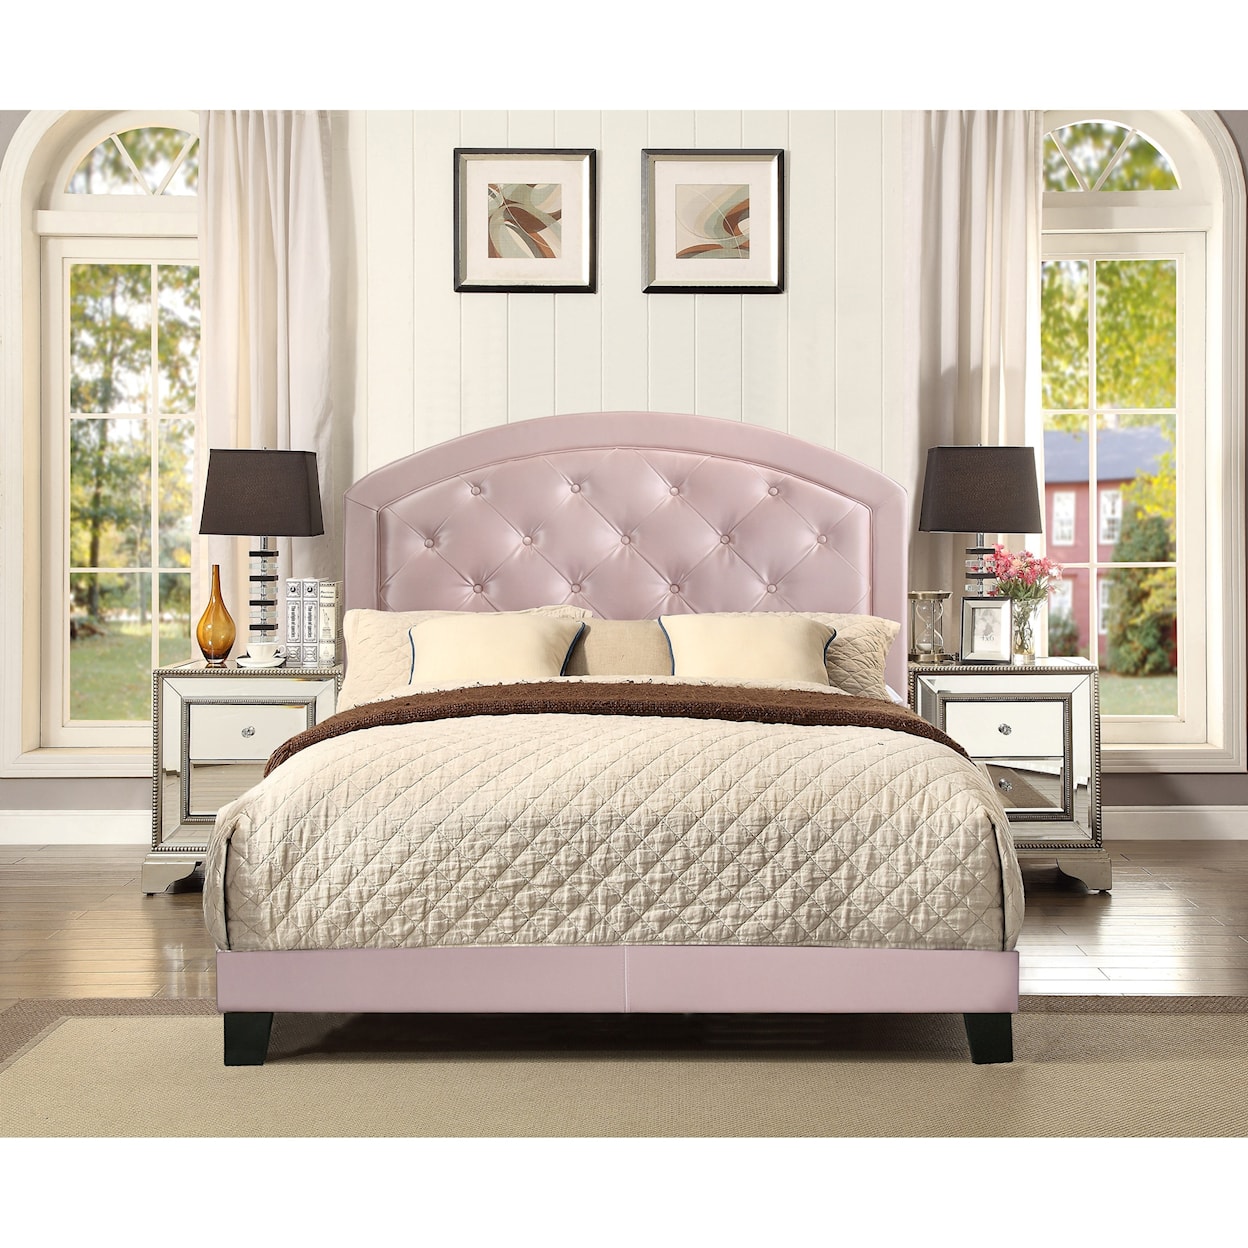 Crown Mark Gaby SHINY PINK FULL BED |